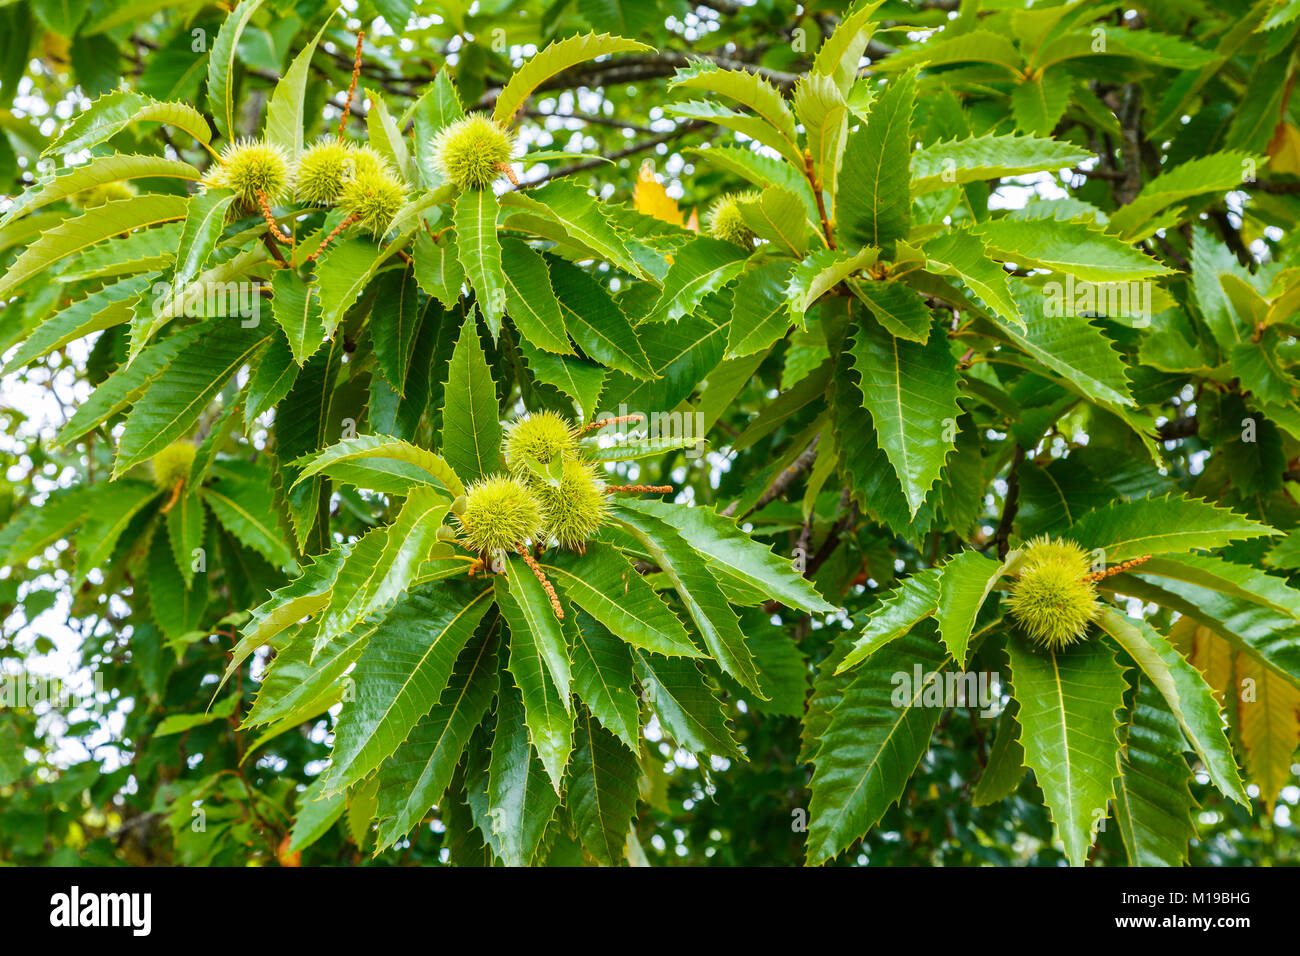 Leaves and chestnuts. Sweet chestnut (Castanea sativa). Stock Photo